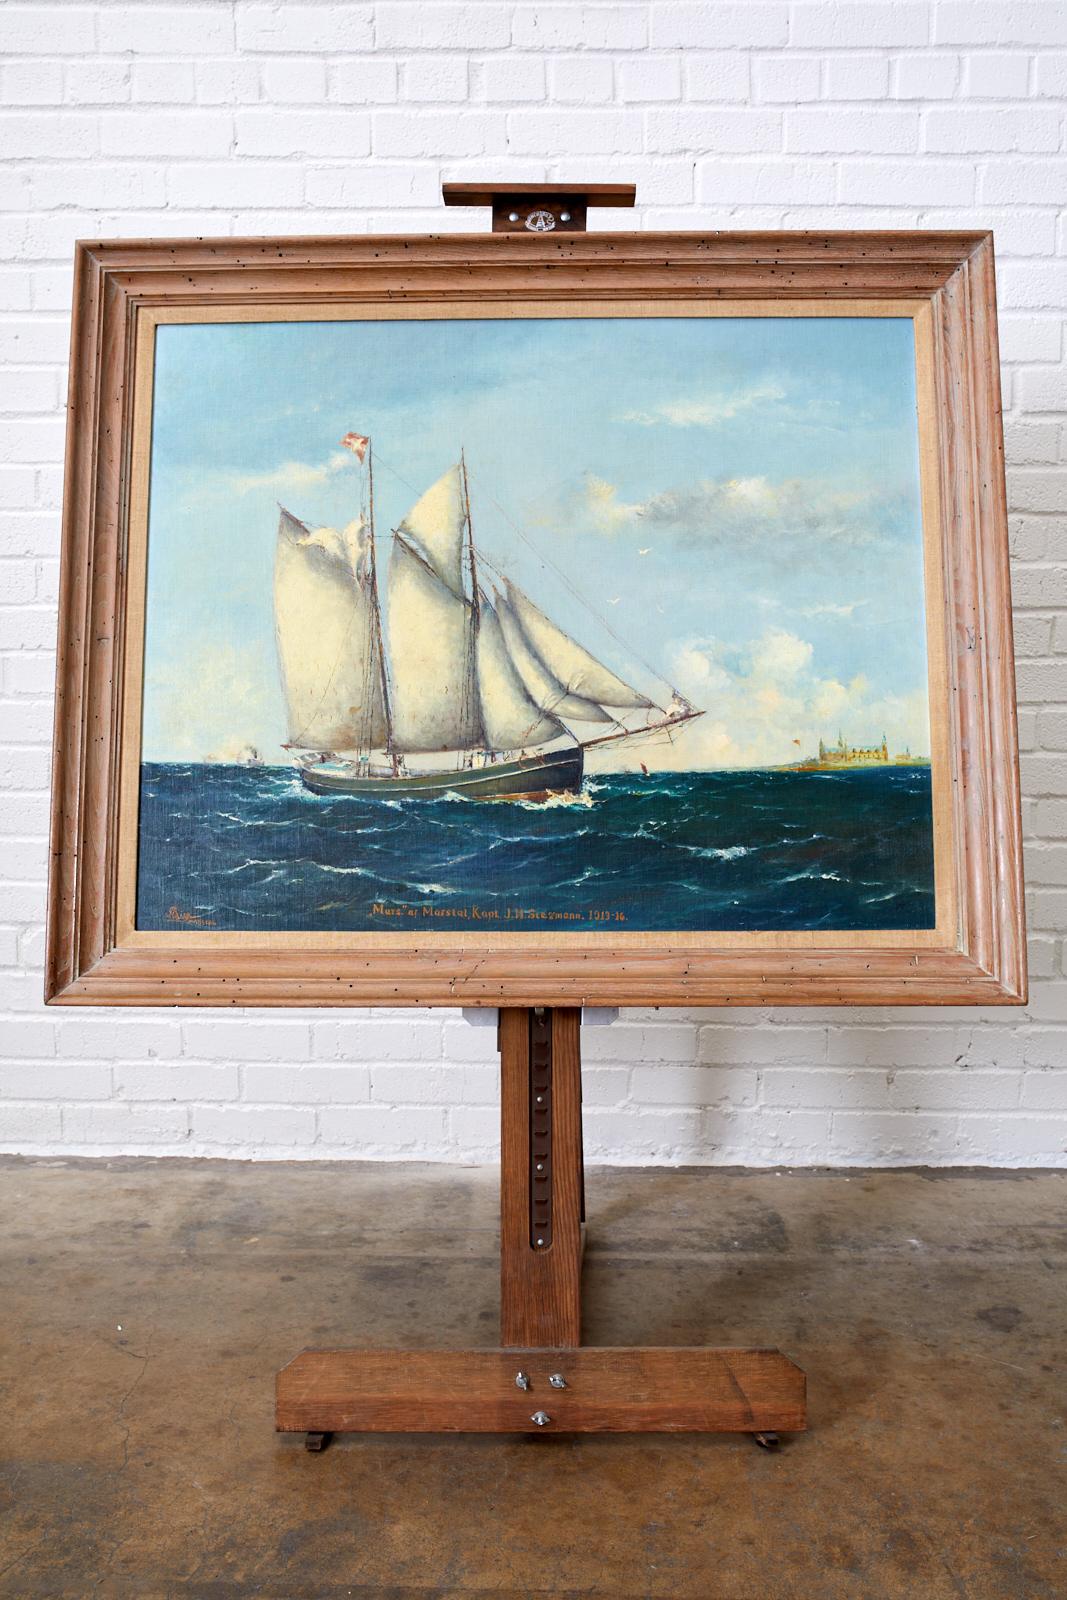 Impressive oil on canvas painting of a Danish sailing ship. Signed by artist on bottom left and notated as Marstal Denmark with the name and date of early 20th century captain. Art measures 36 wide by 29 inches high set in a large wooden frame. 